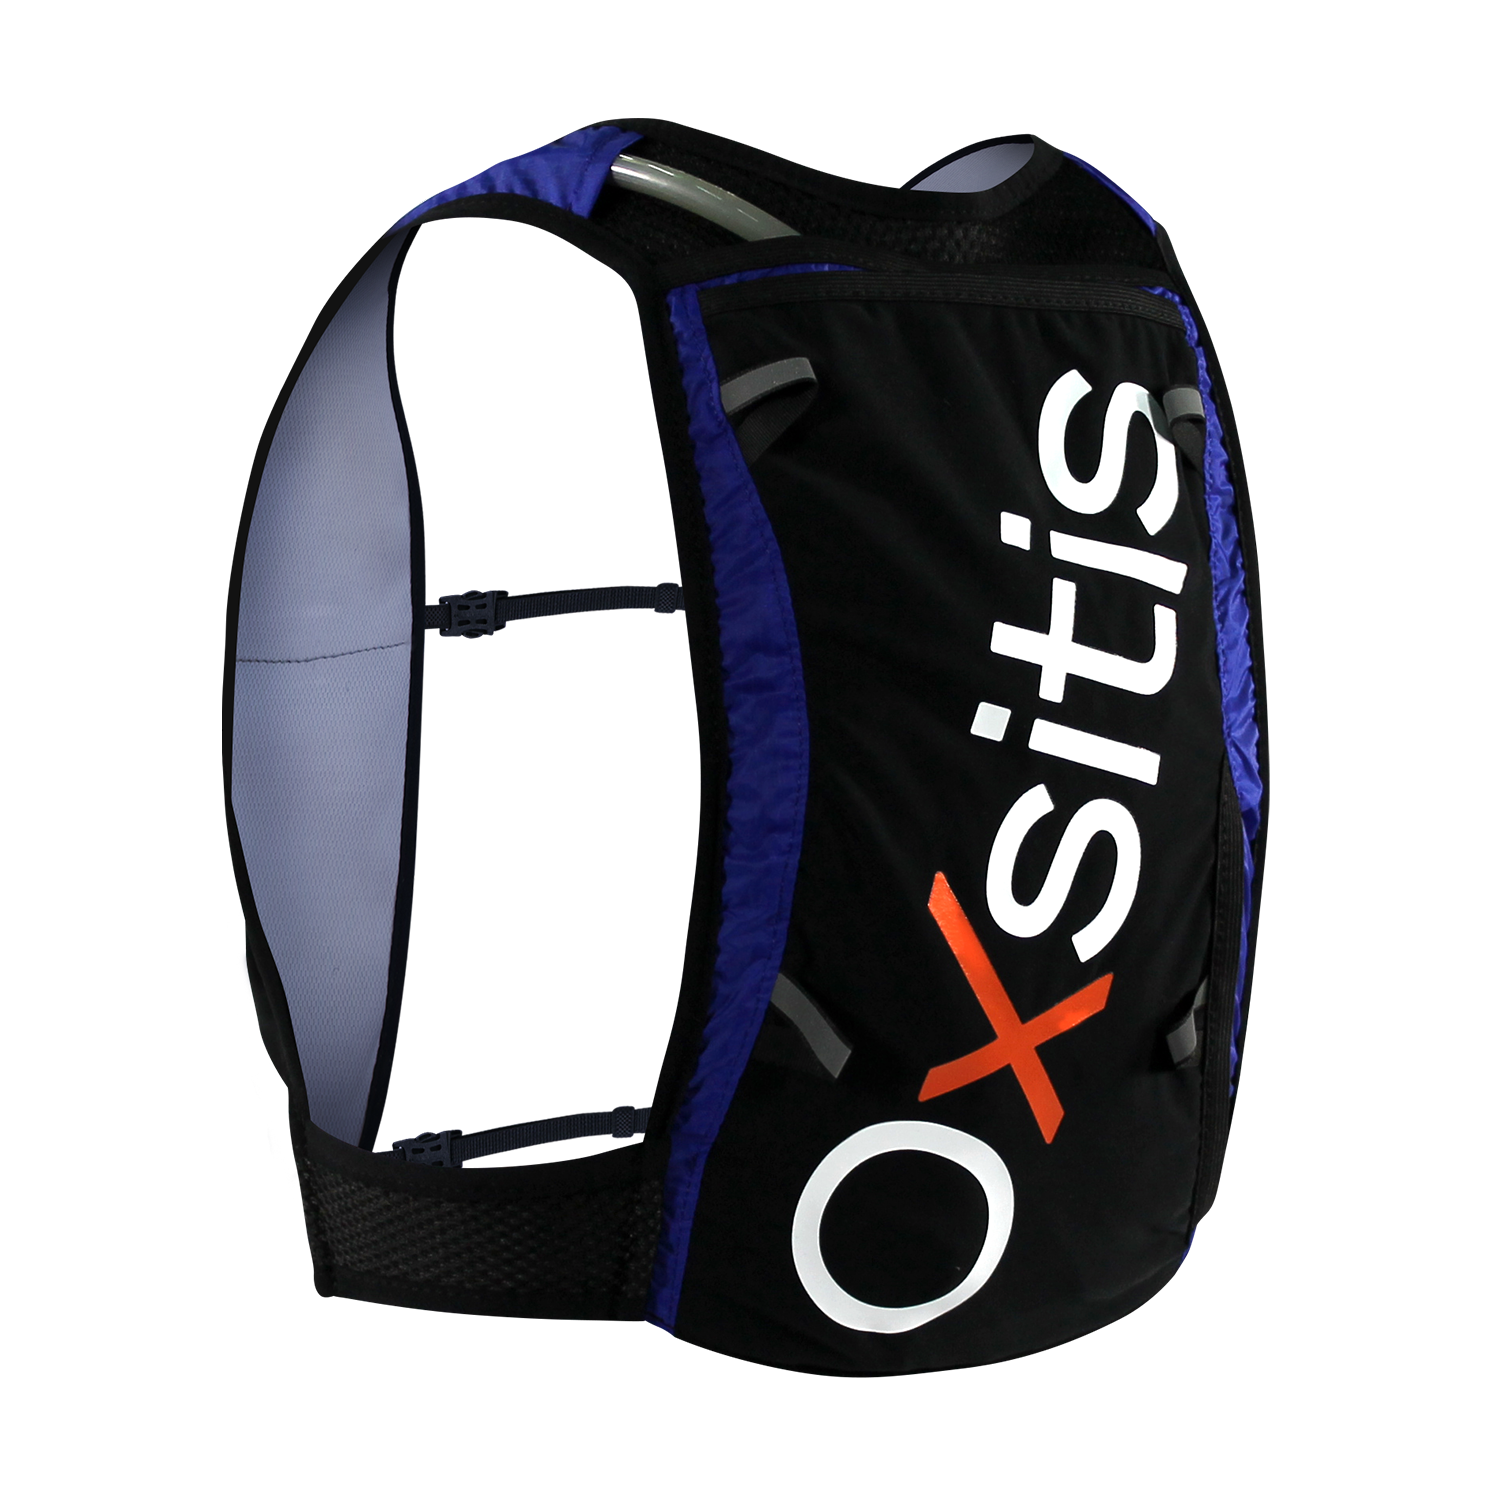 Oxsitis MTB - Cycling backpack